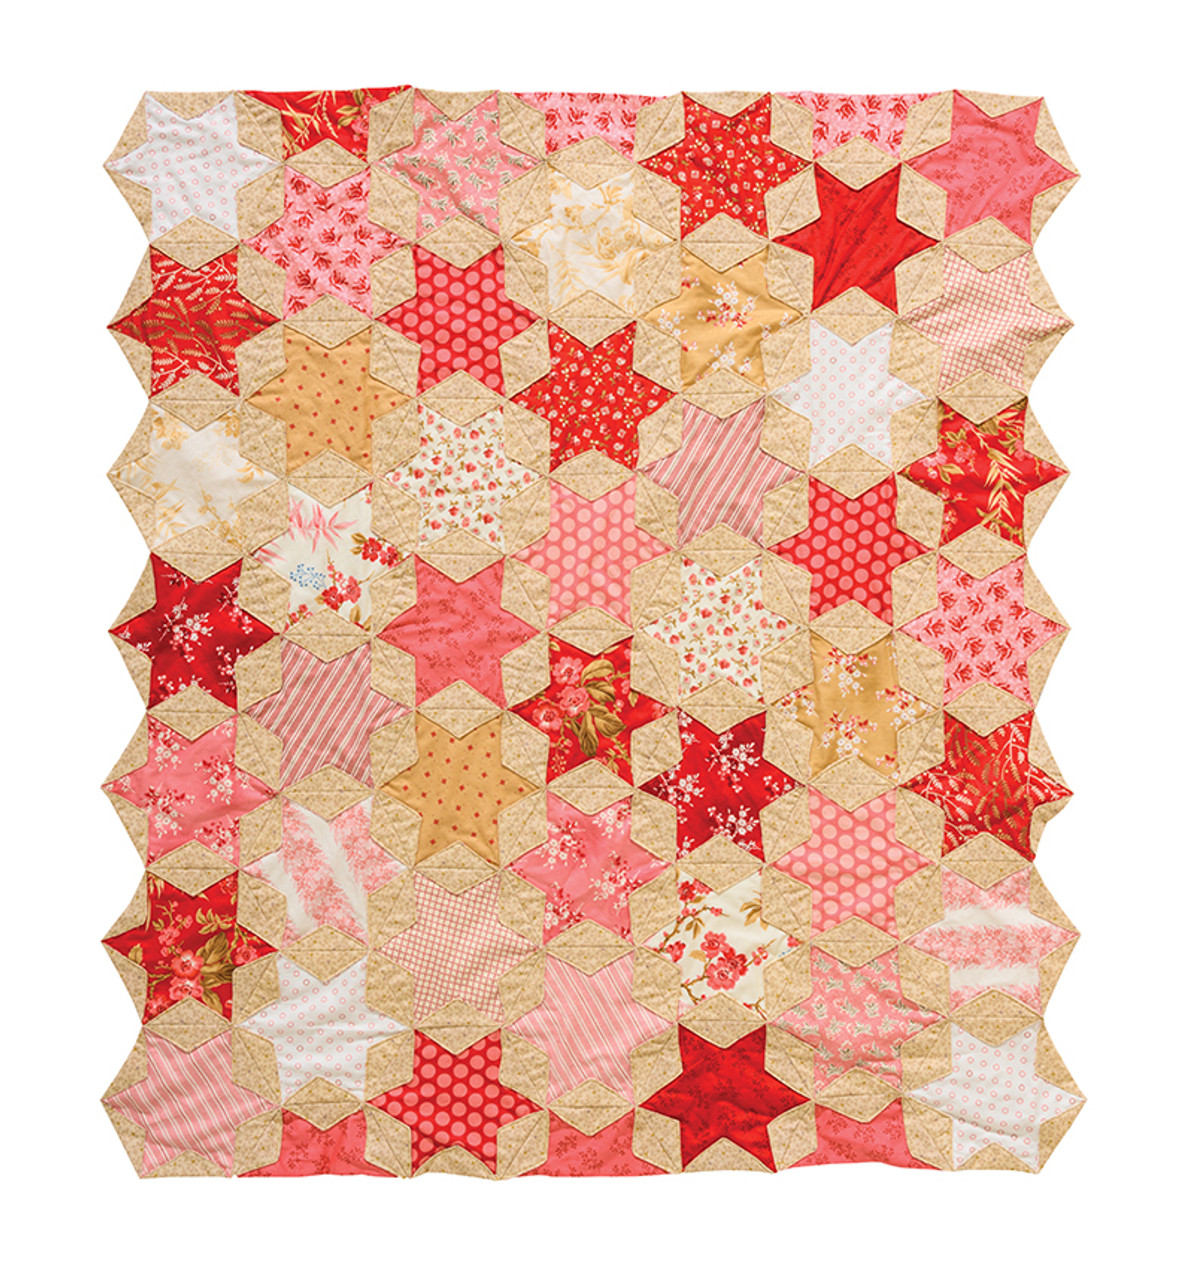 New Ways to Quilt As-You-Go - C&T Publishing